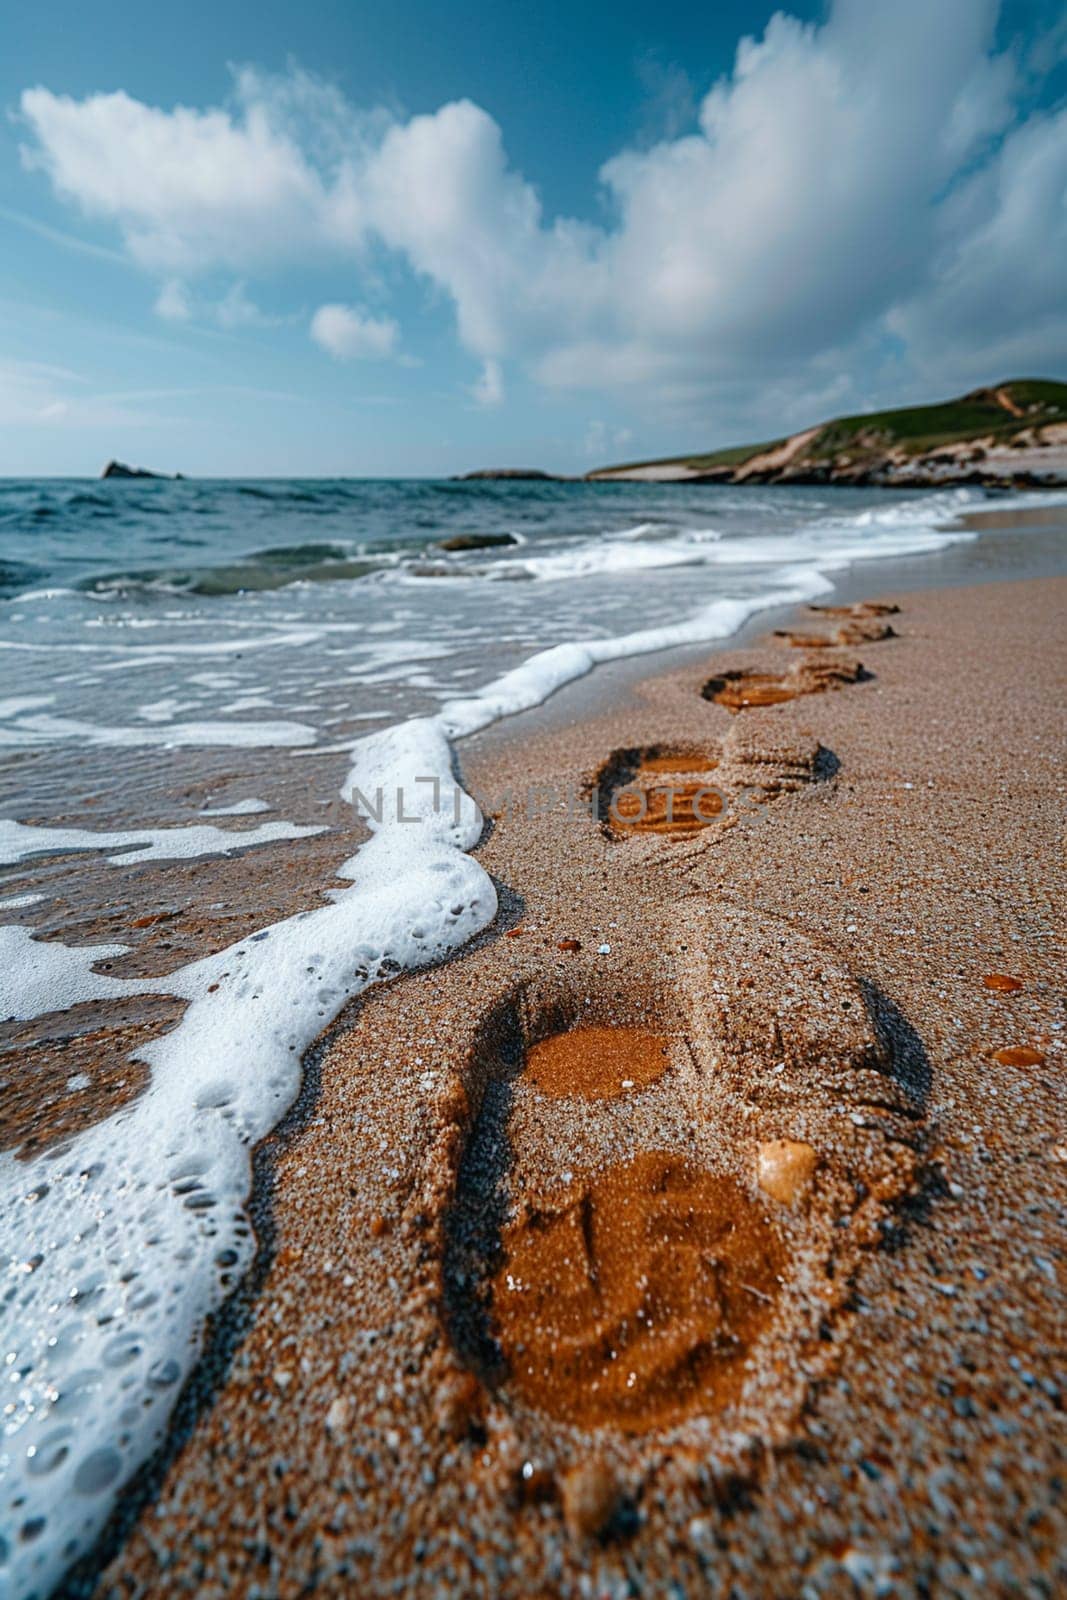 Footsteps in the sand at a peaceful beach, evoking a sense of solitude and reflection